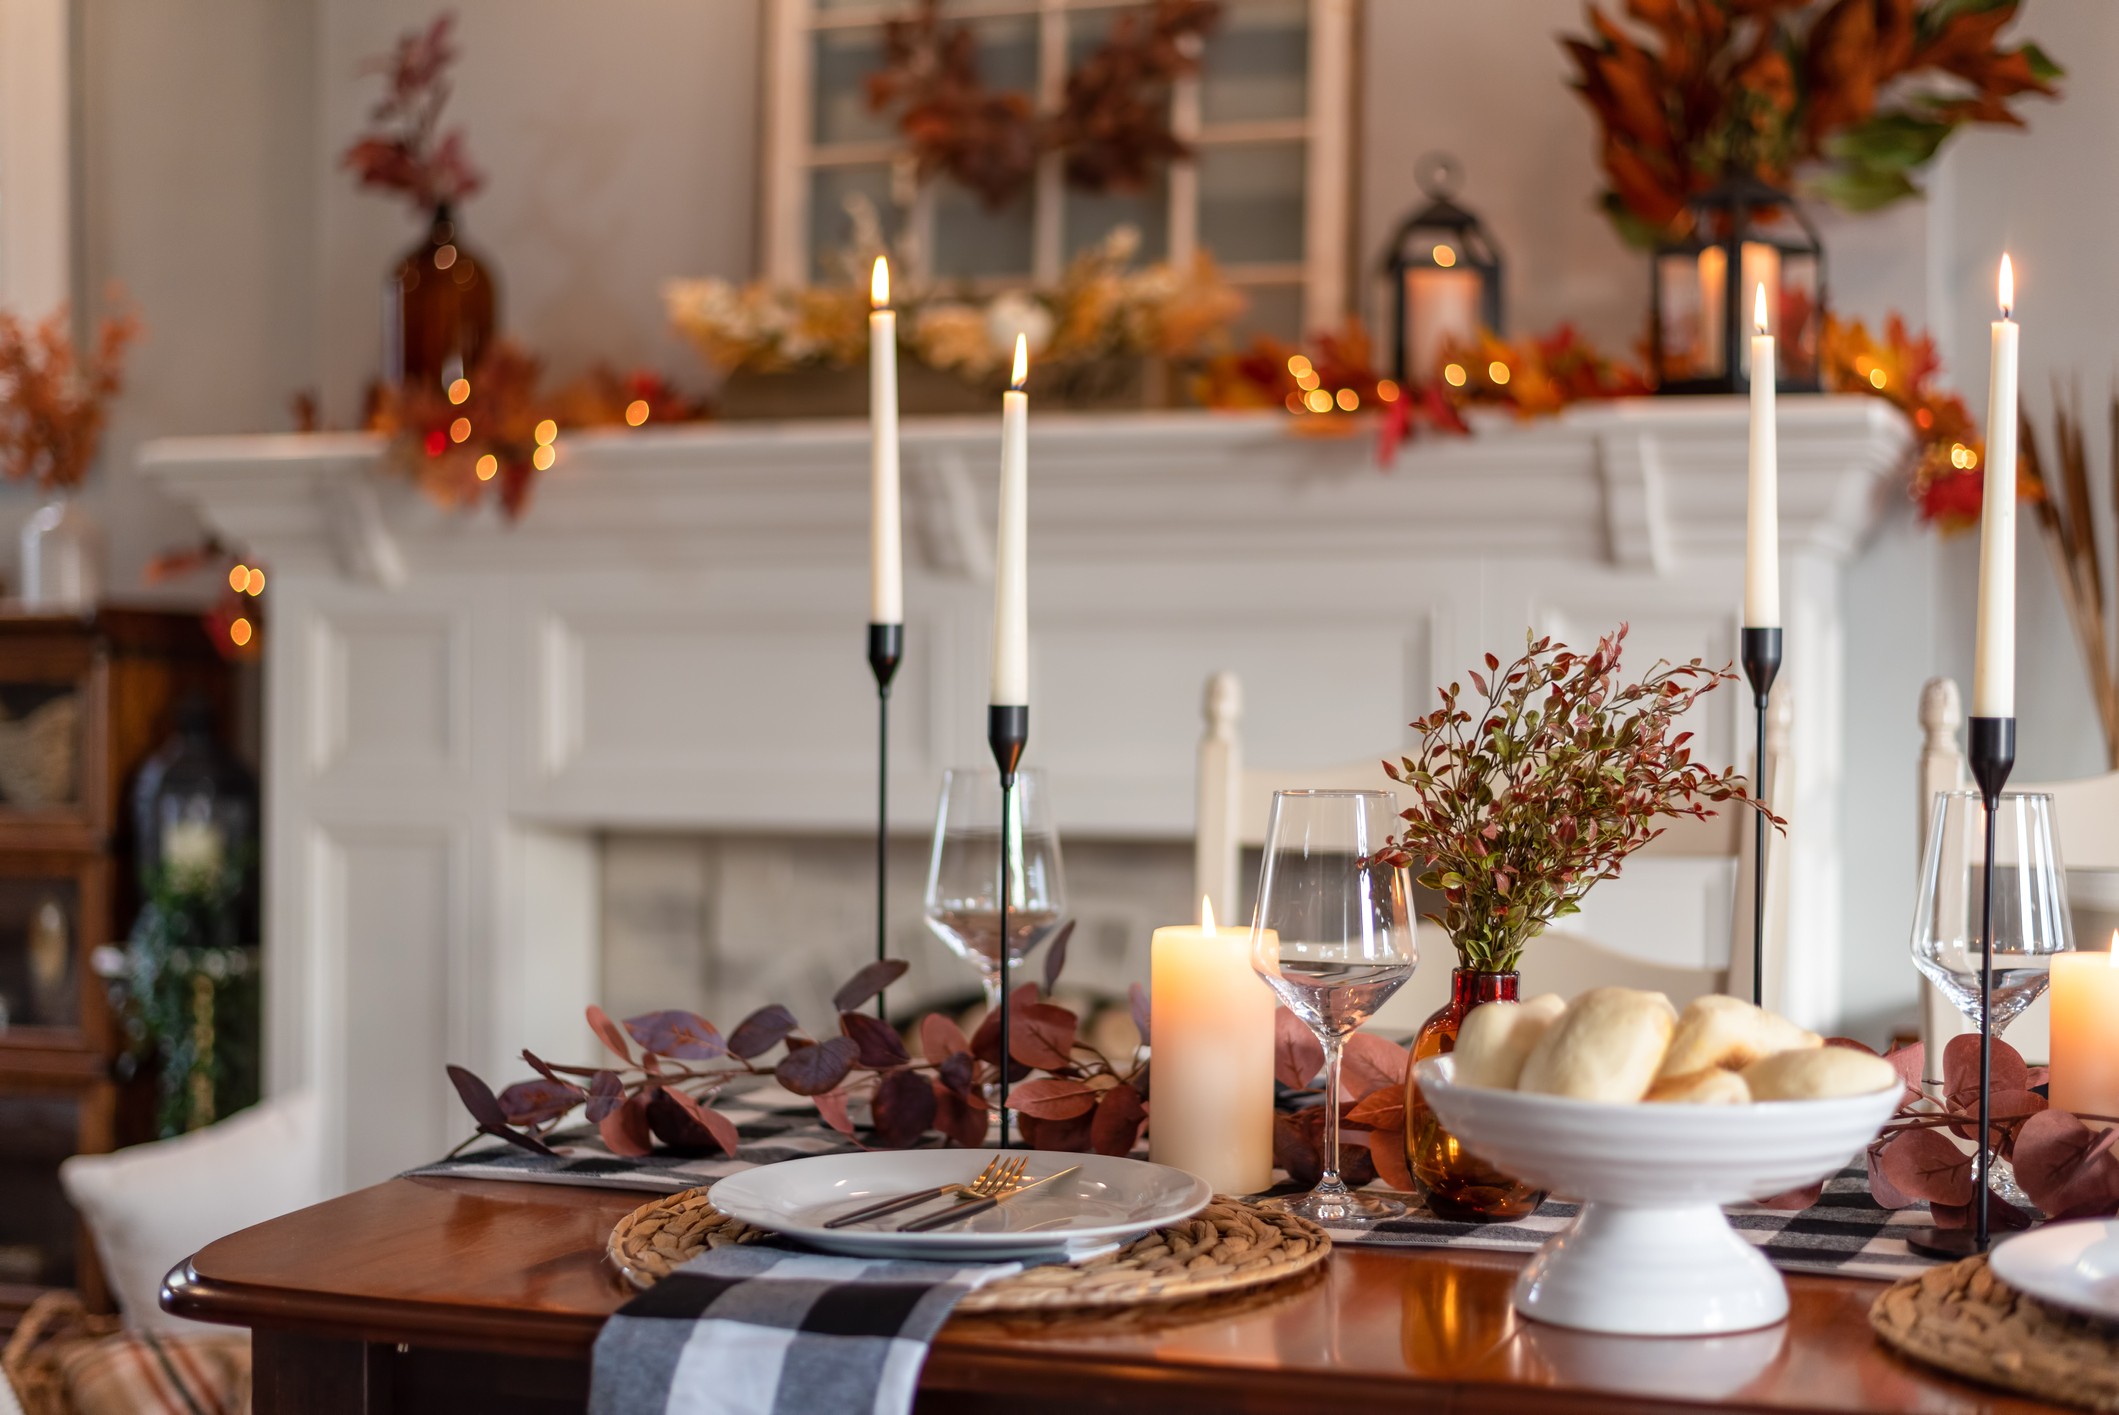 A dining table elegantly set for Thanksgiving dinner with a decorated fireplace in the background.